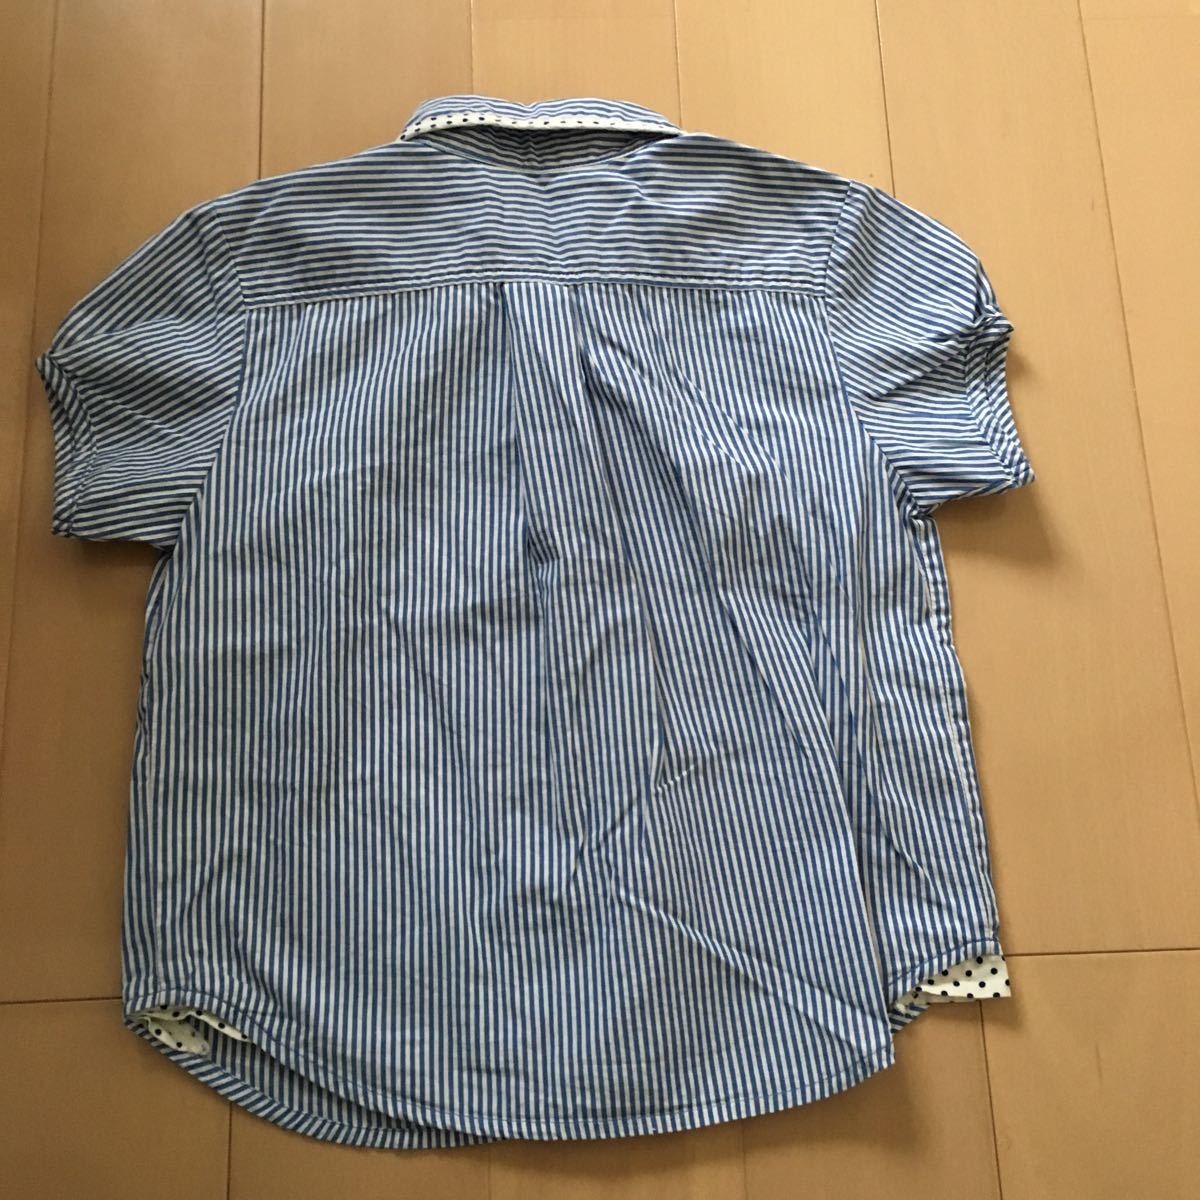  free shipping beautiful goods SHIPS refreshing stripe short sleeves shirt circle collar 120cm postage included 